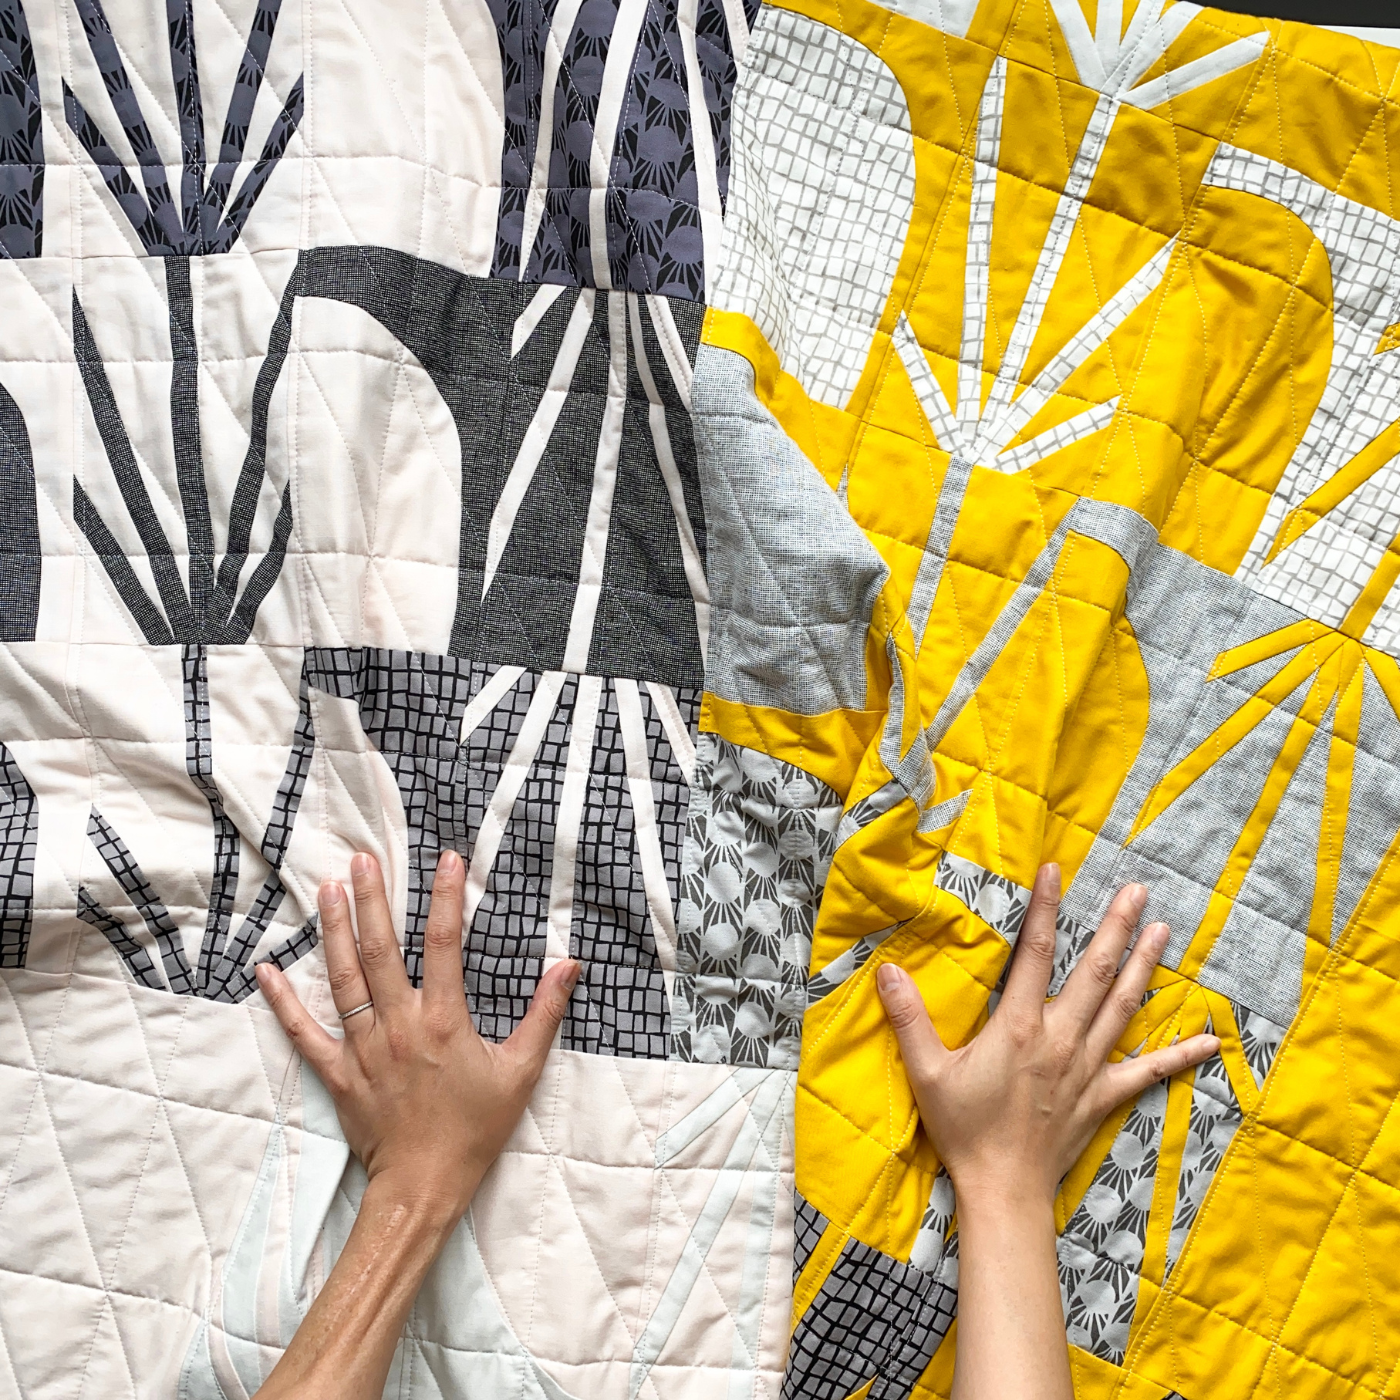 Two hands and forearms reach out and touch a quilt that is all white in the bottom left; white, black and gray geometric designs in the top left; yellow and white geometric designs on the top right; and yellow, gray and black geometric designs on the bottom right.